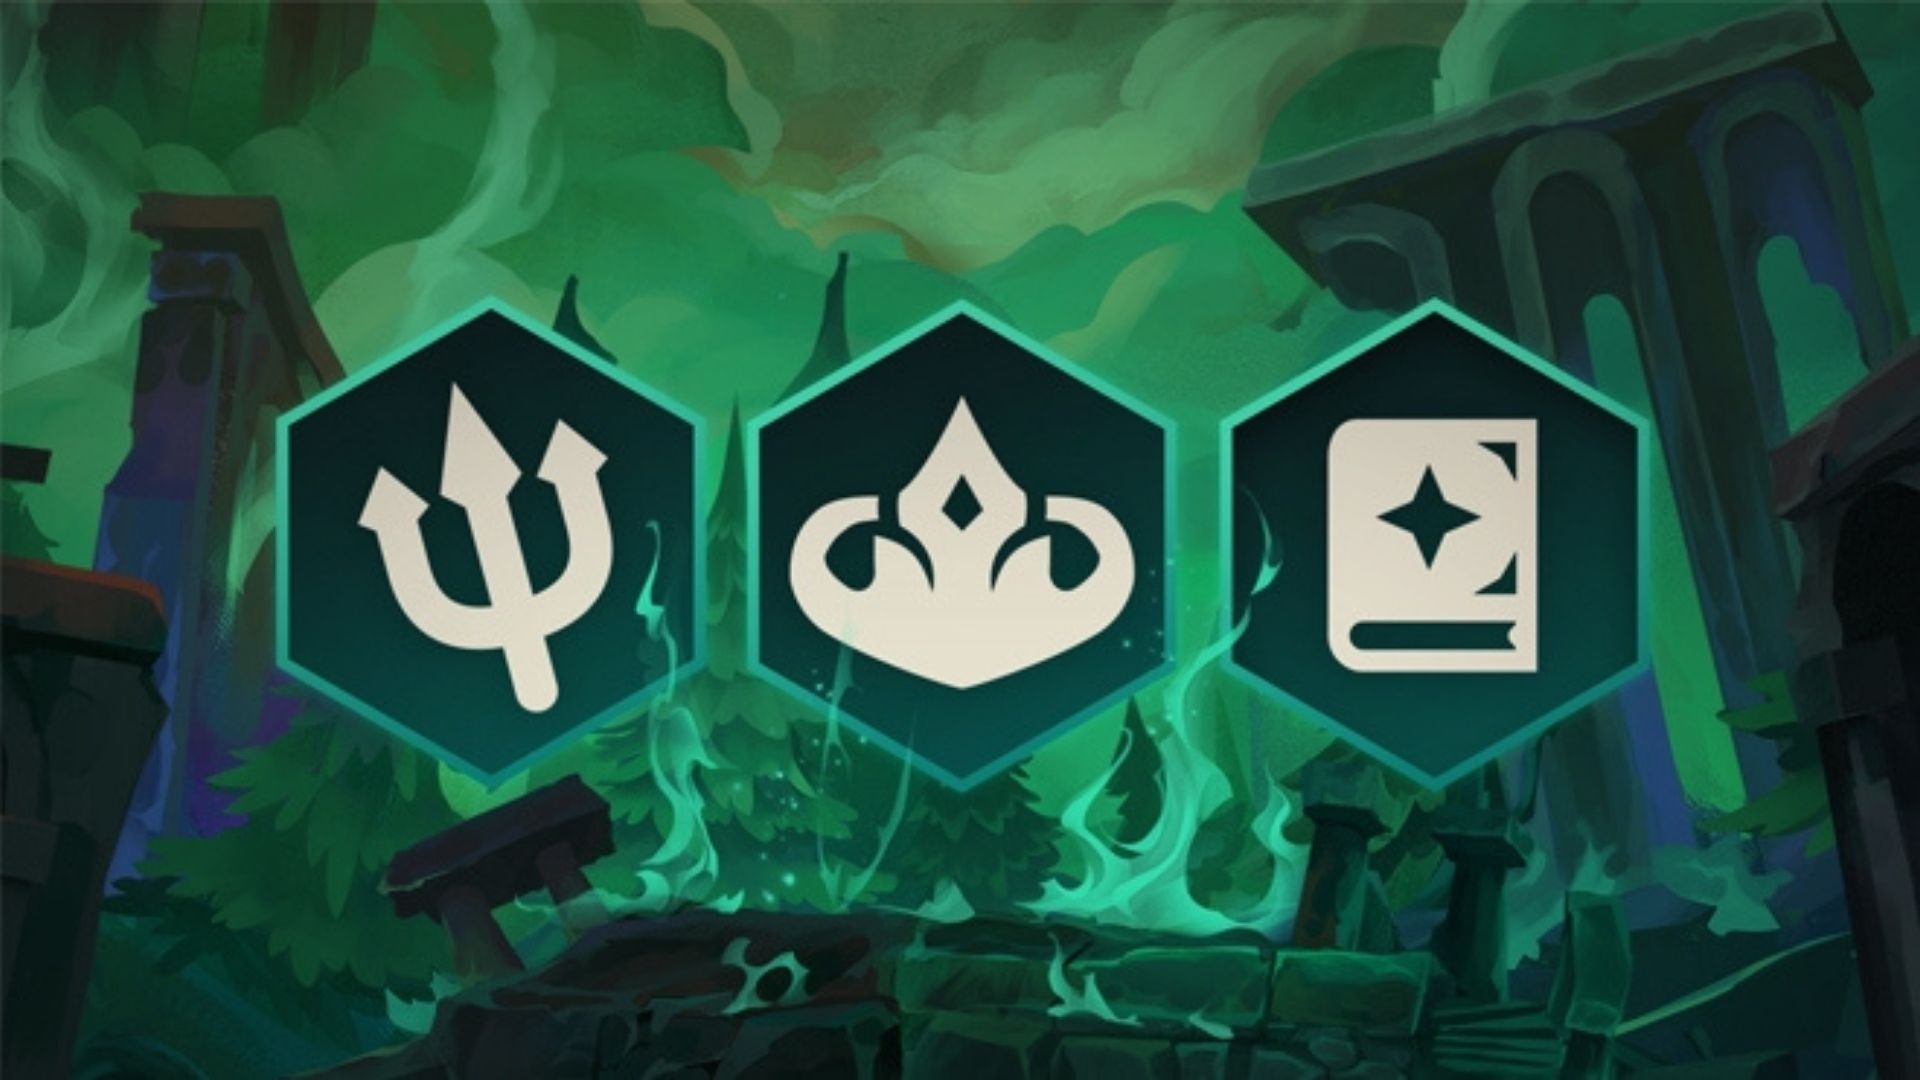 Master, Grandmaster, and Challenger: The Apex Tiers – League of Legends  Support